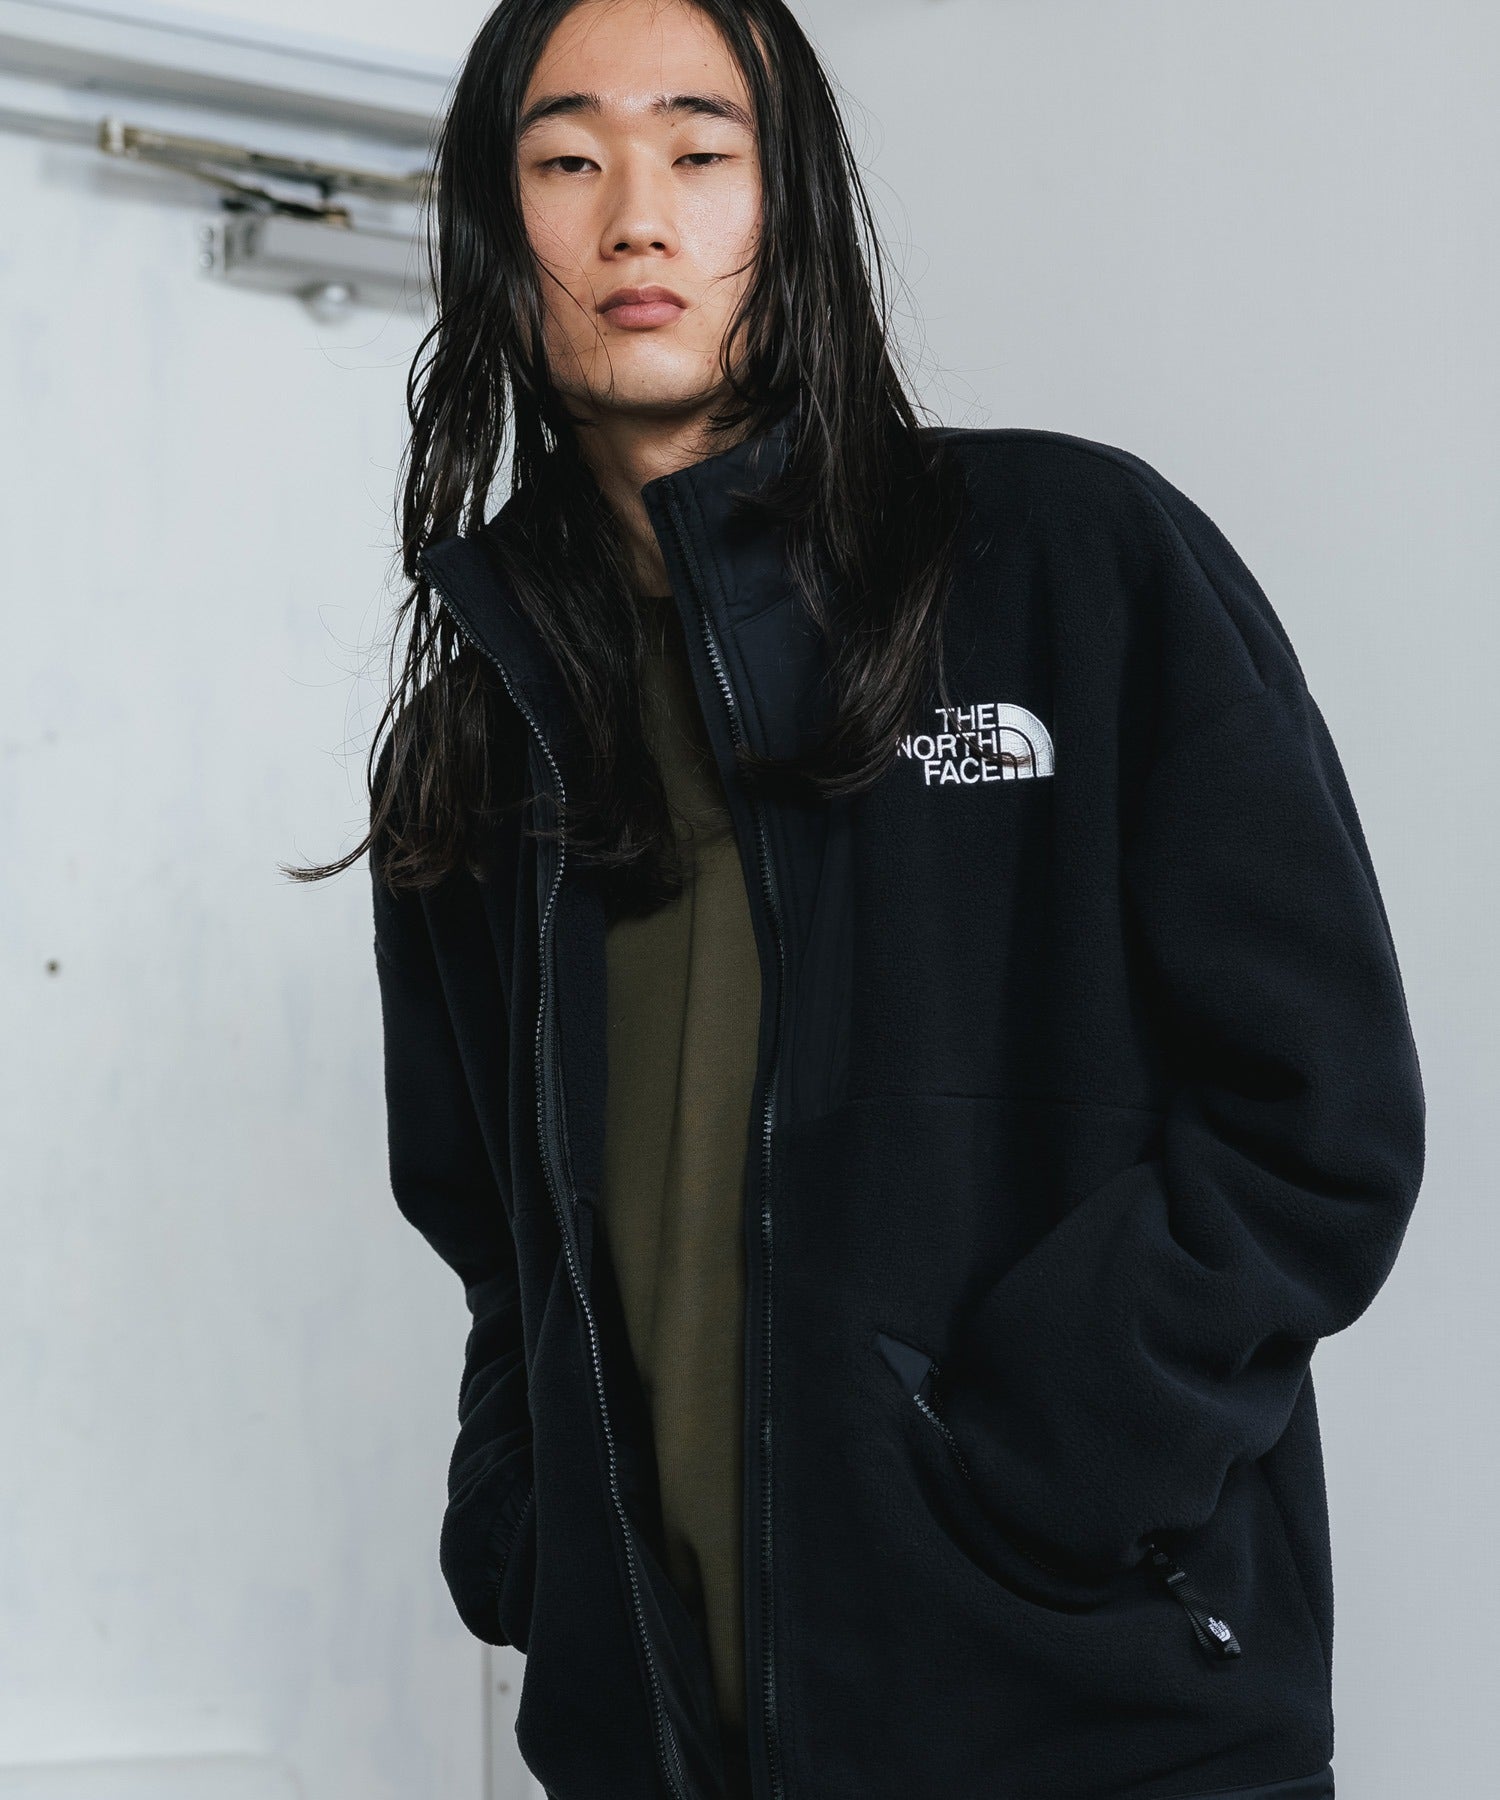 THE NORTH FACE  Curtin Fleece Jacketデナリジャケット